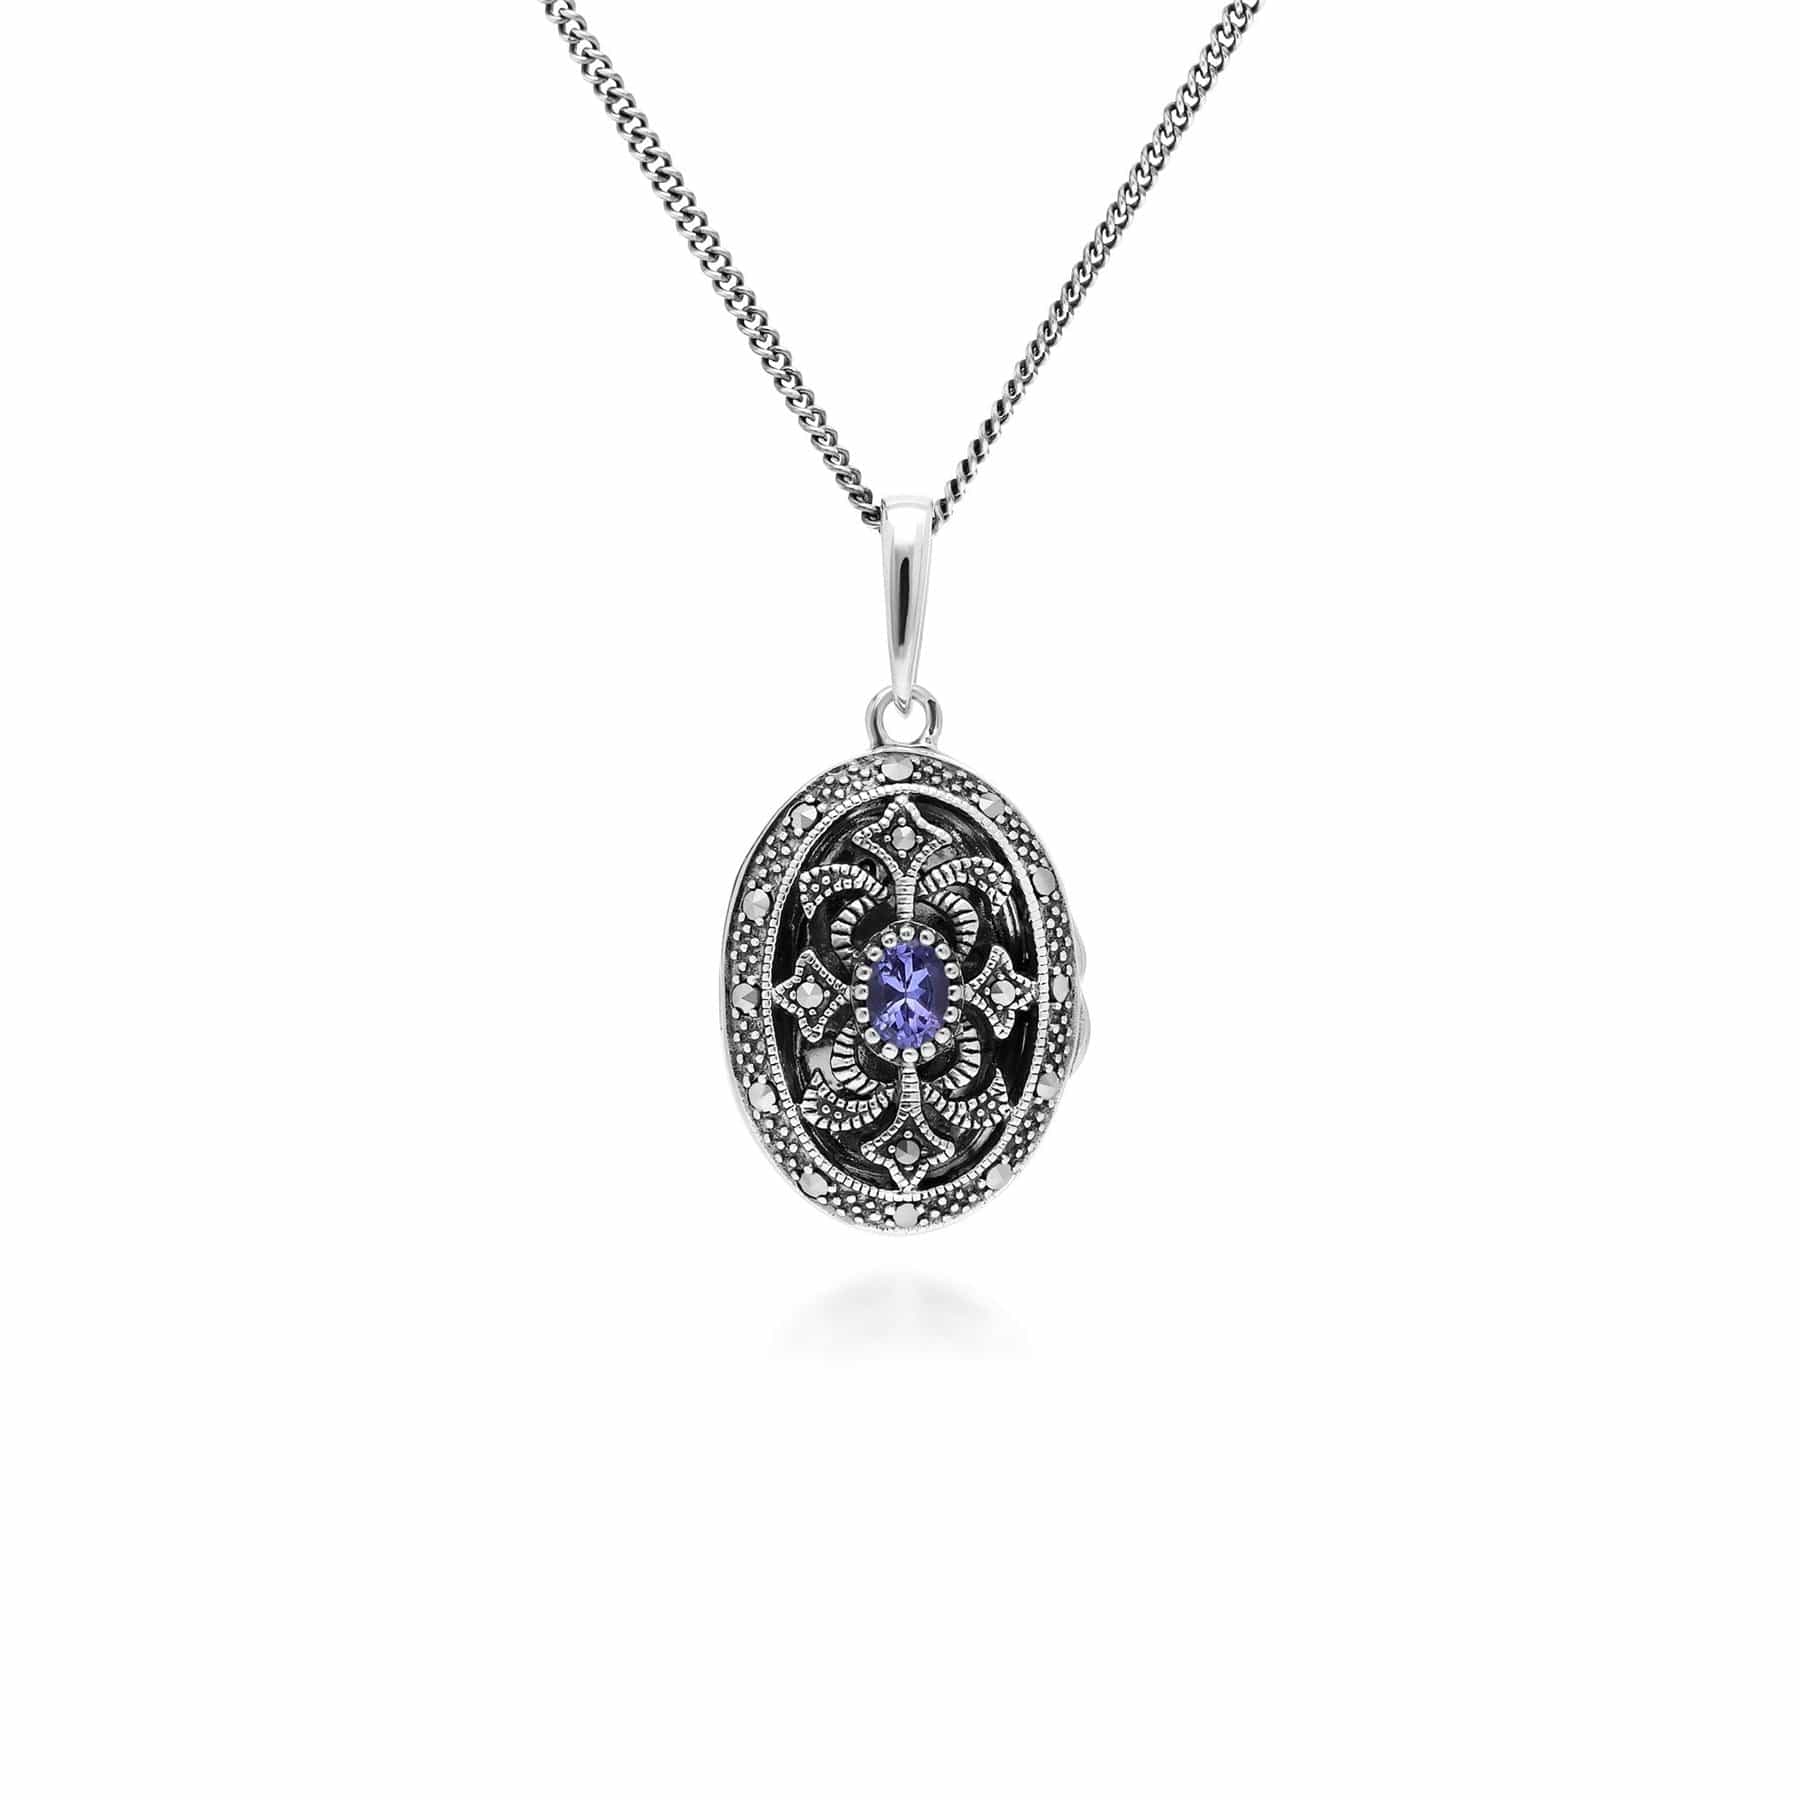 214N716209925 Art Nouveau Style Oval Tanzanite & Marcasite Locket Necklace in 925 Sterling Silver 1